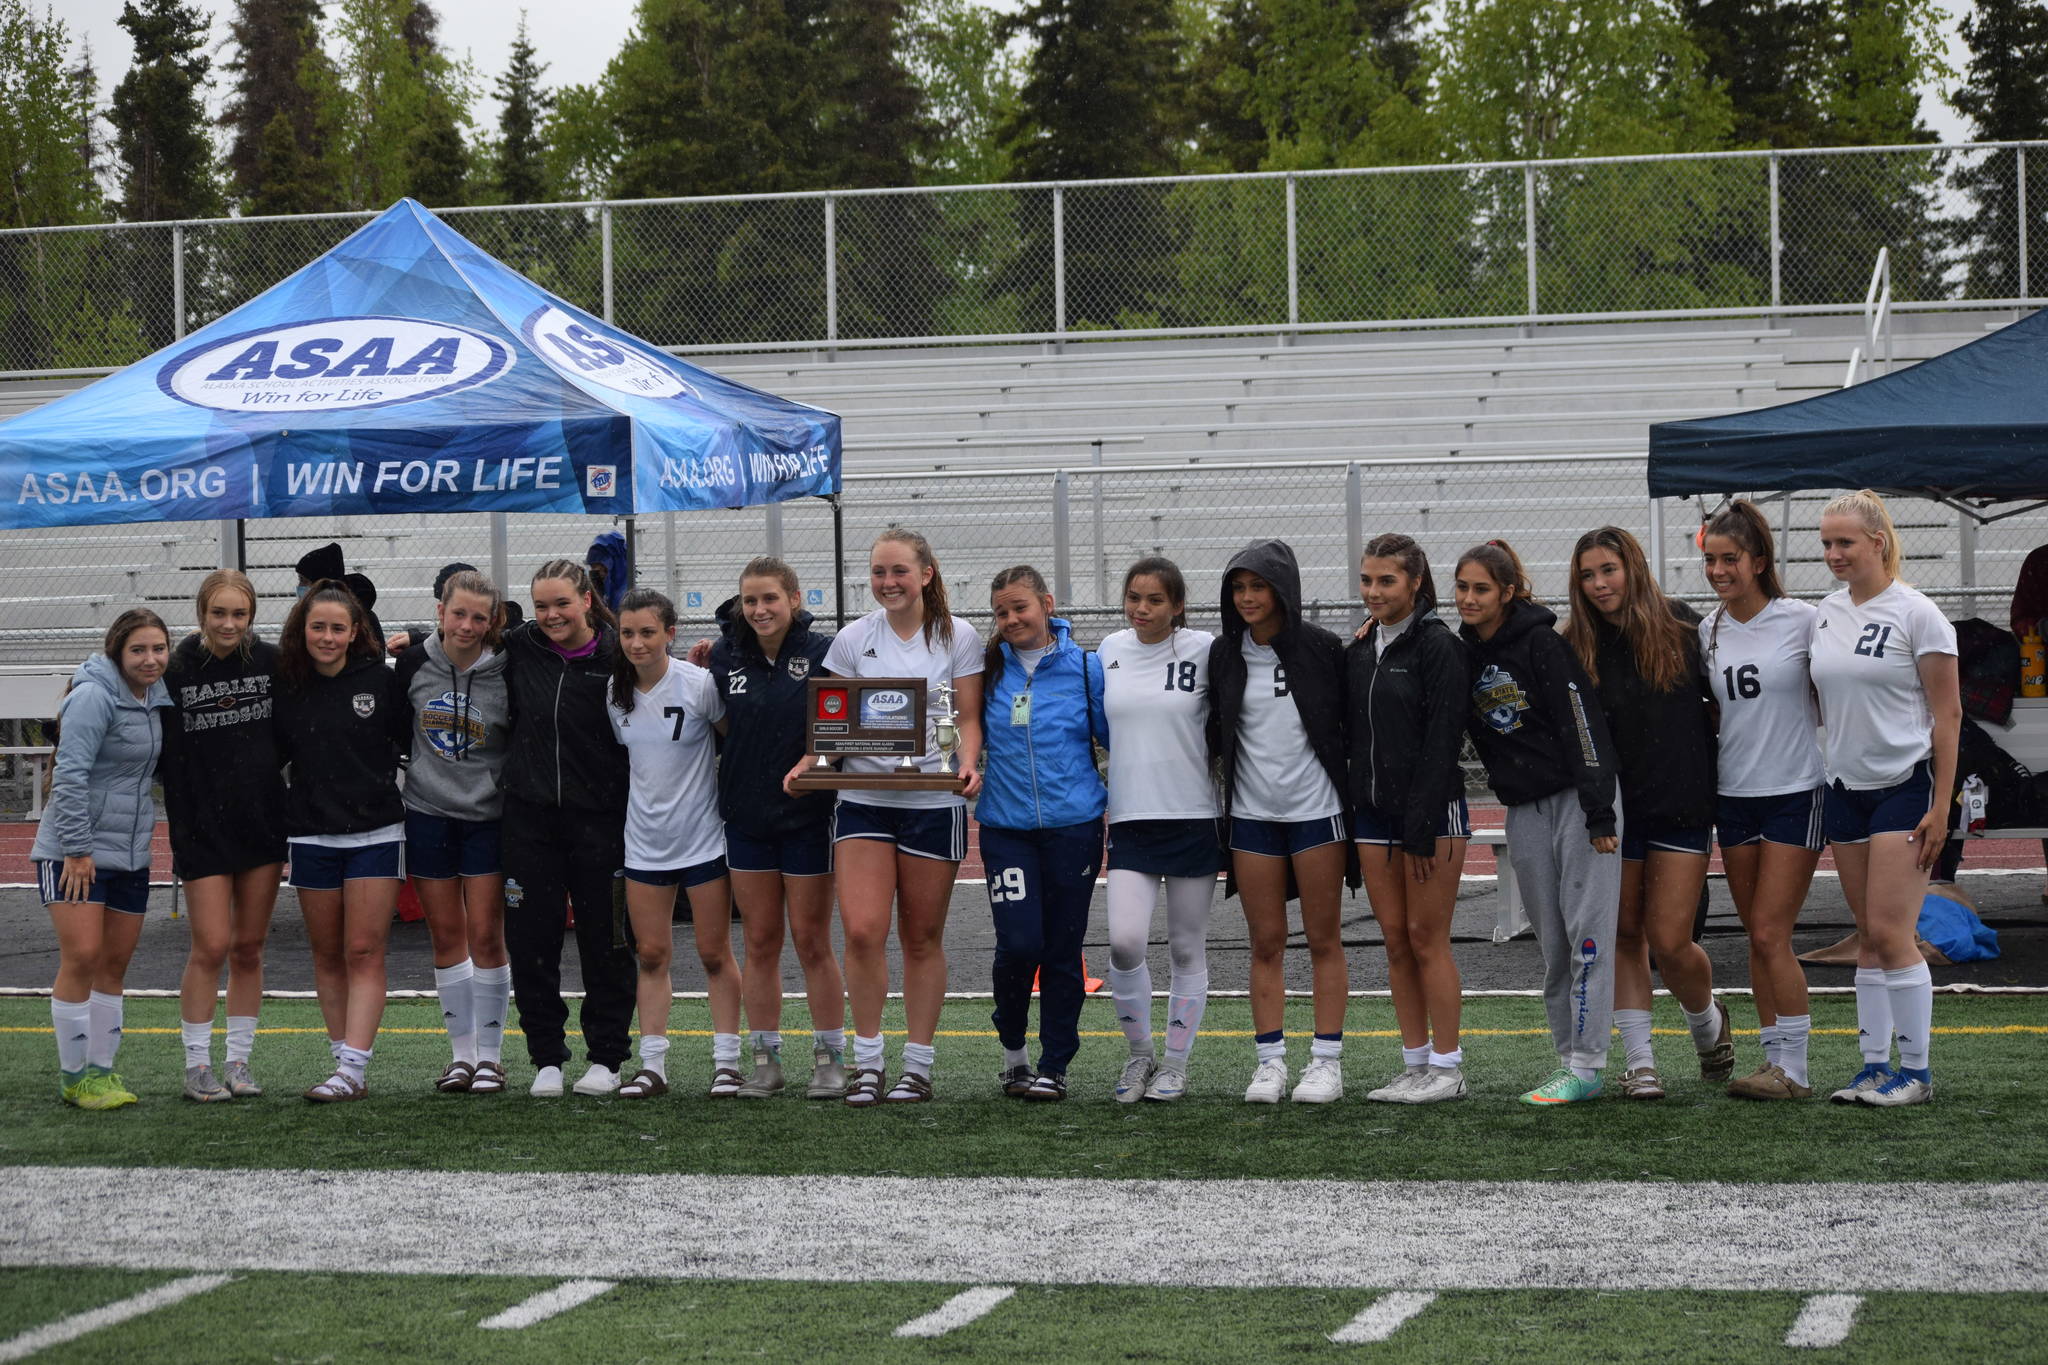 The Soldotna High School girls varsity soccer team wins second place at the state championship game in Anchorage, Alaska on Saturday, May 29, 2021. (Camille Botello / Peninsula Clarion)